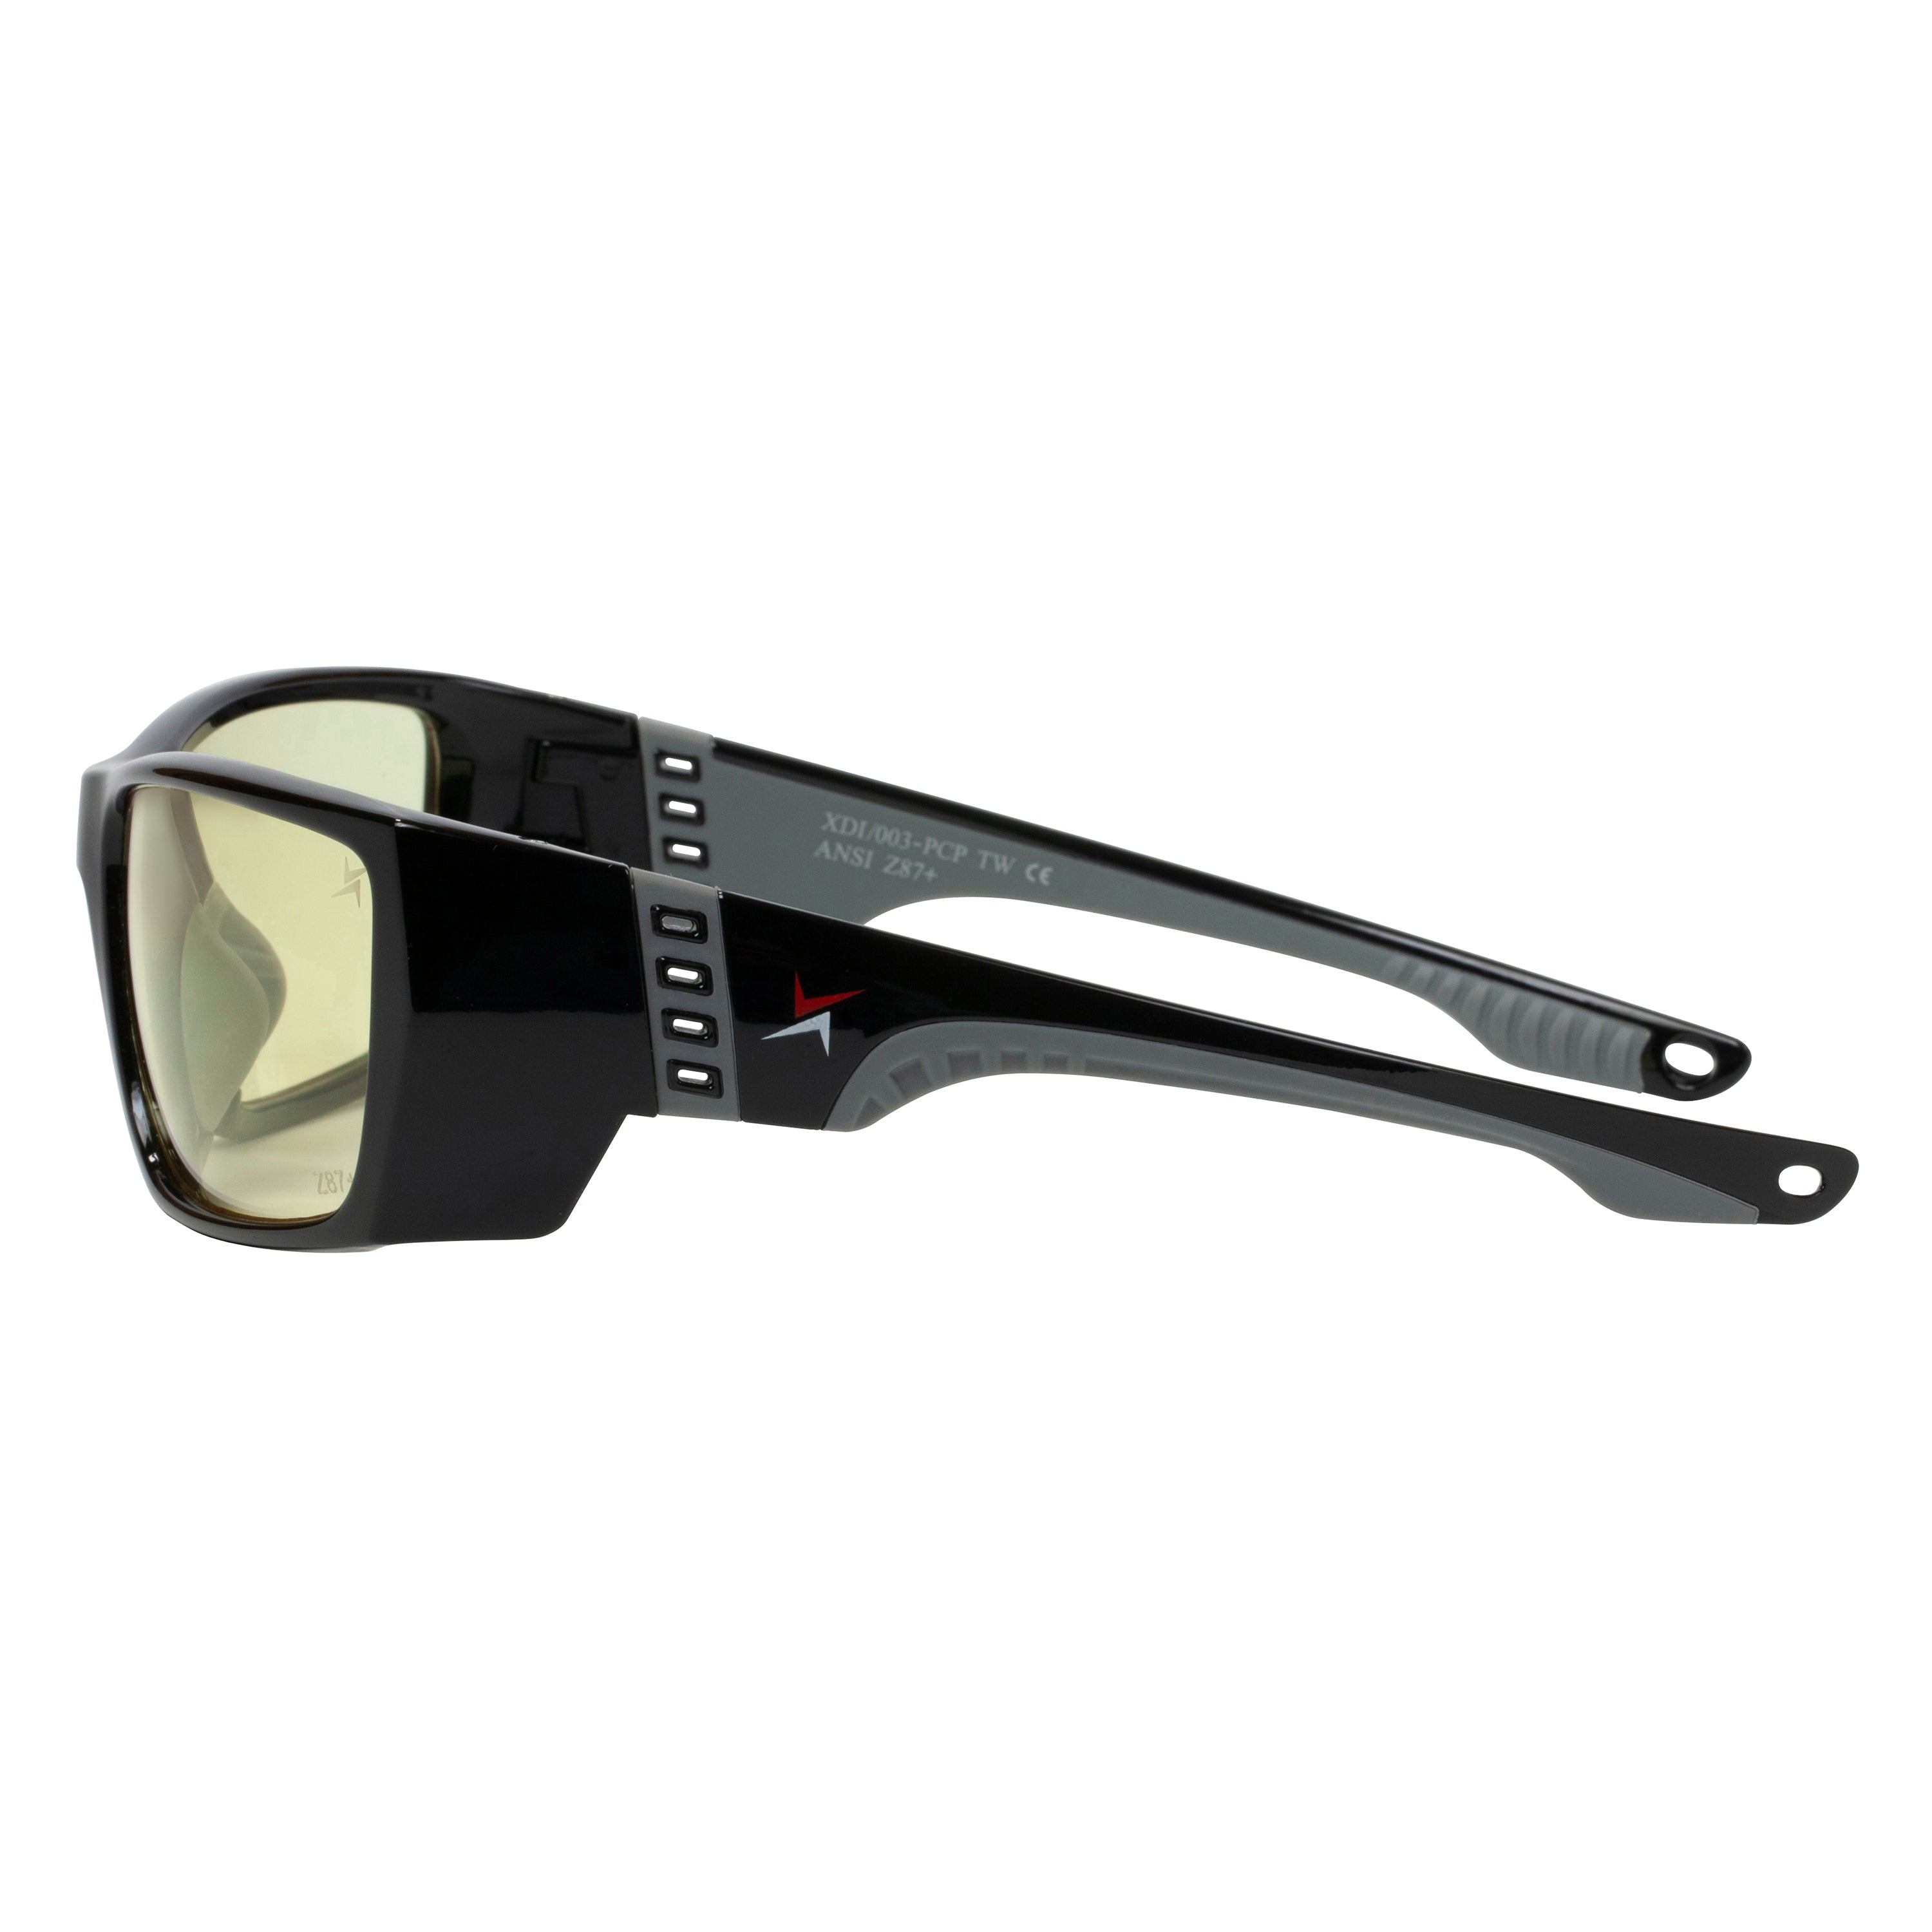 Yellow Tint Lens Sport Safety Sunglasses with Grey Rubber Accents.